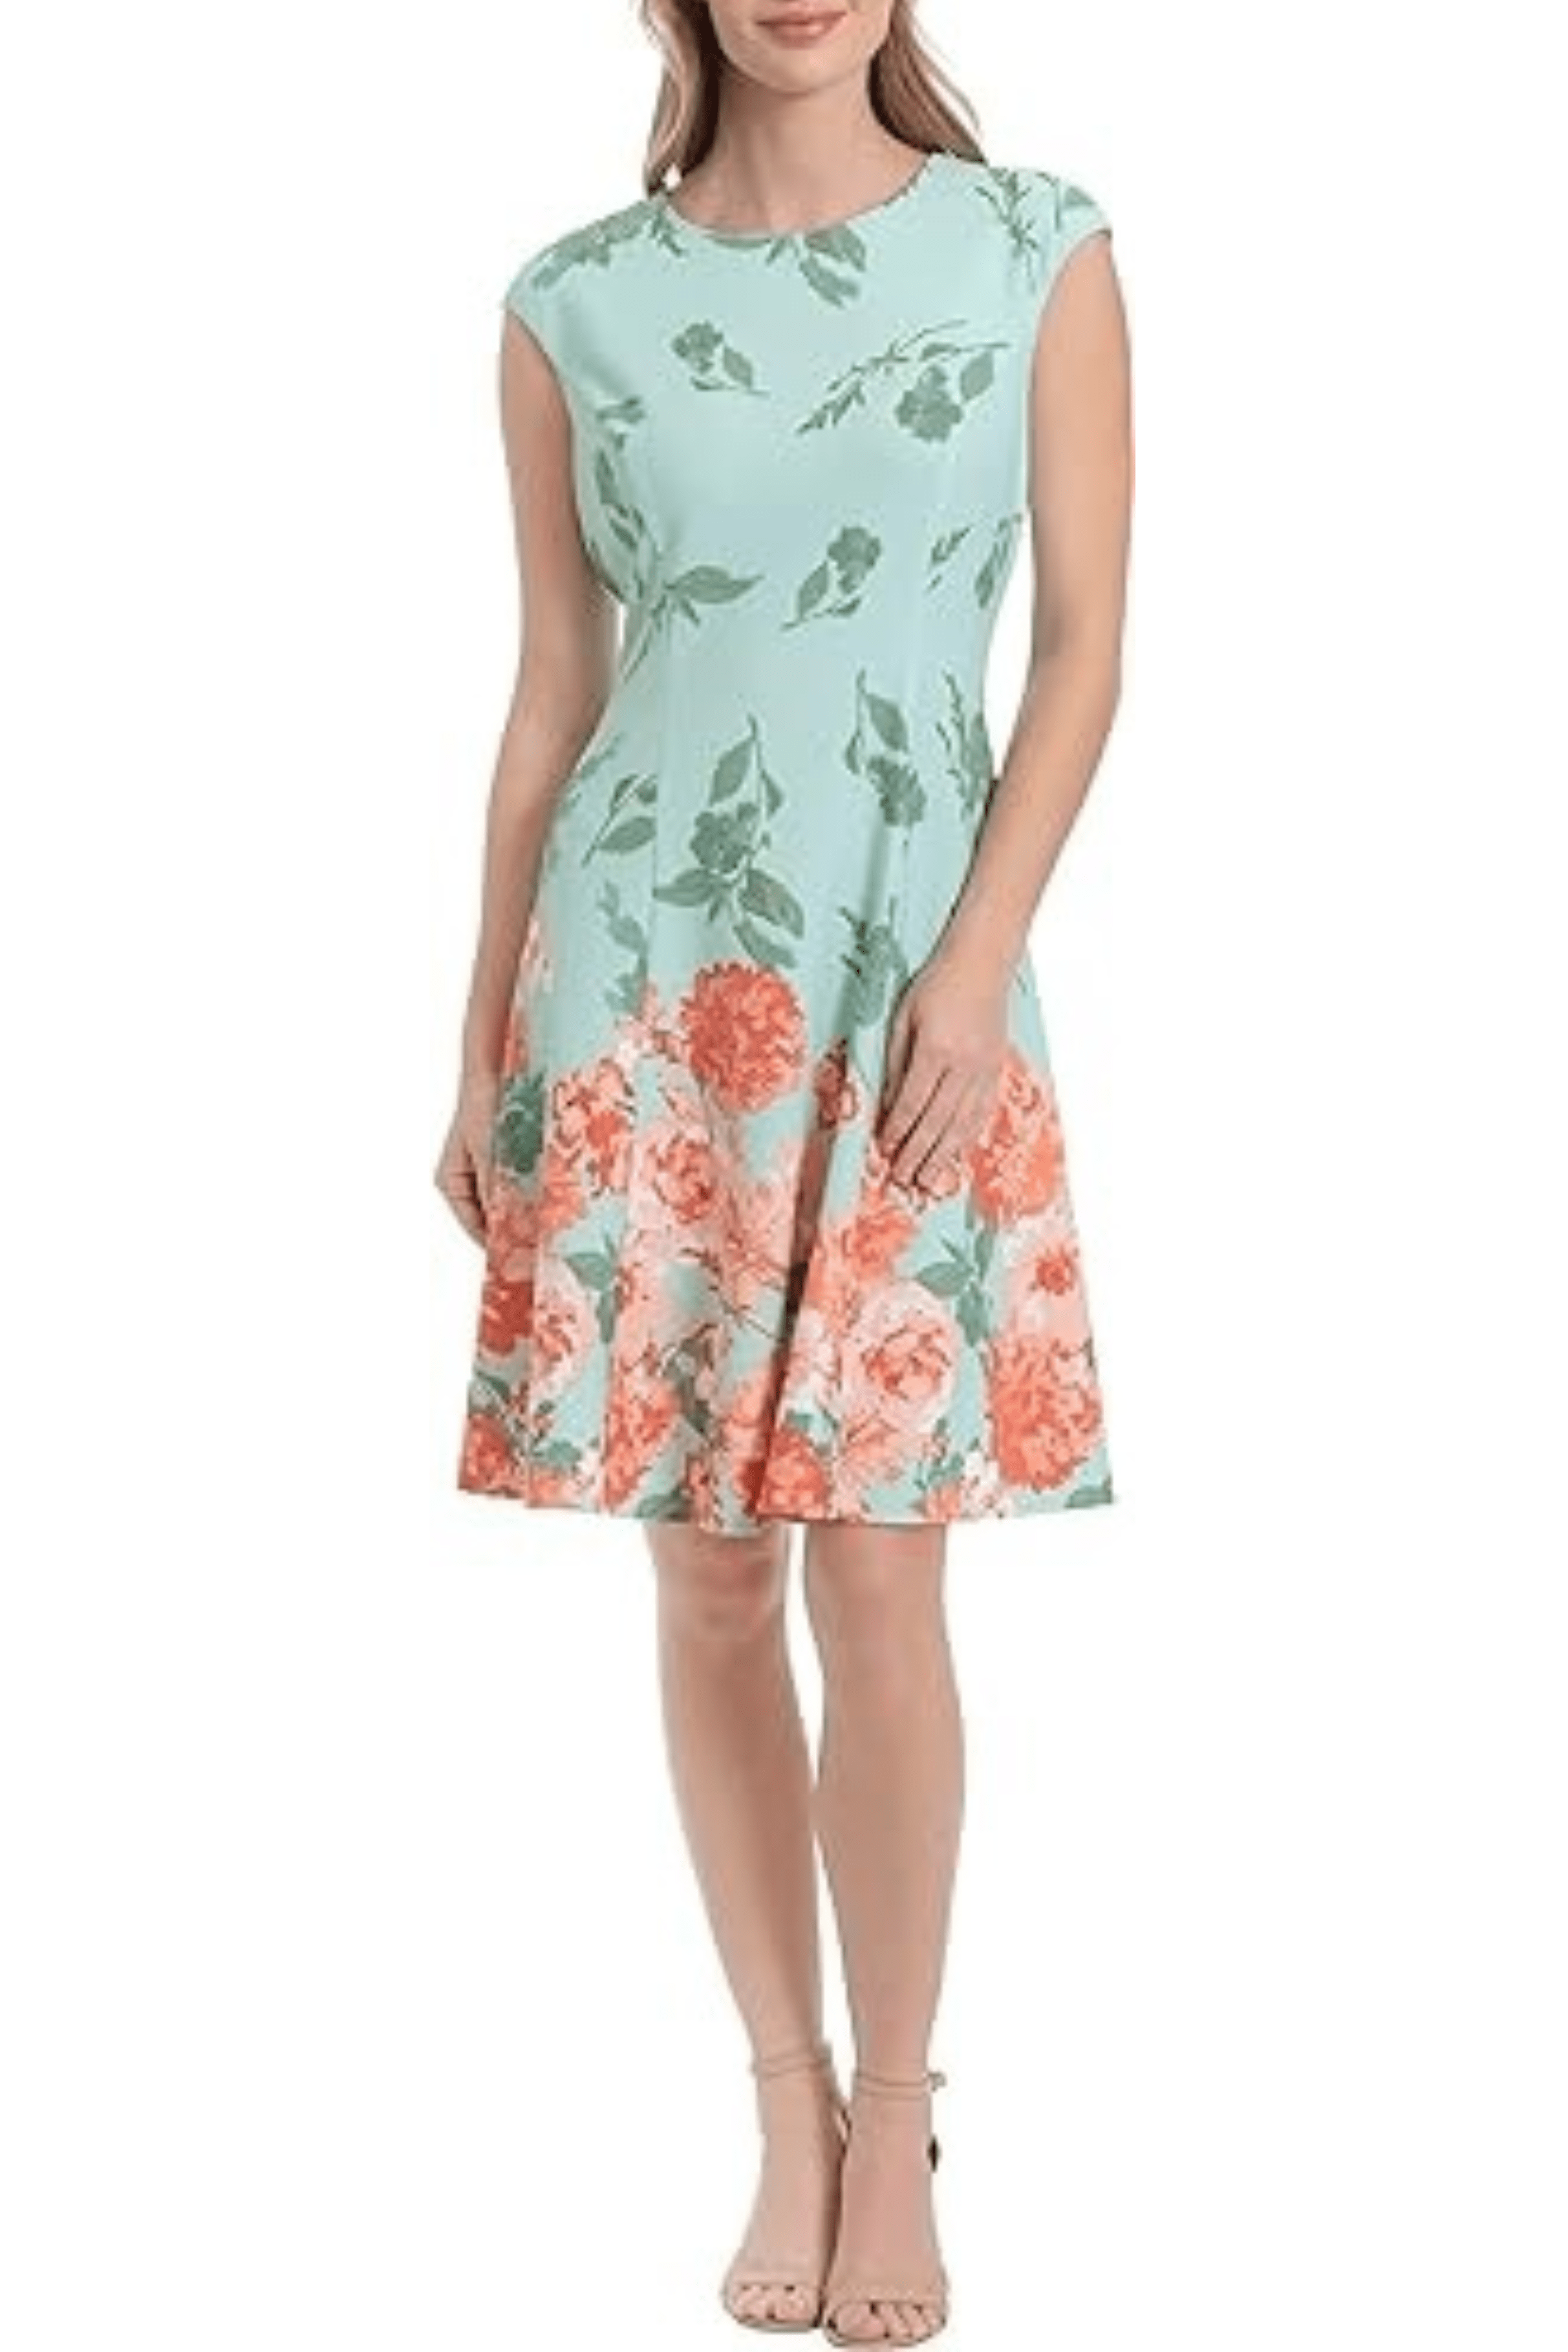 London Times T6705M - Jewel Neck Floral Printed Cocktail Dress
